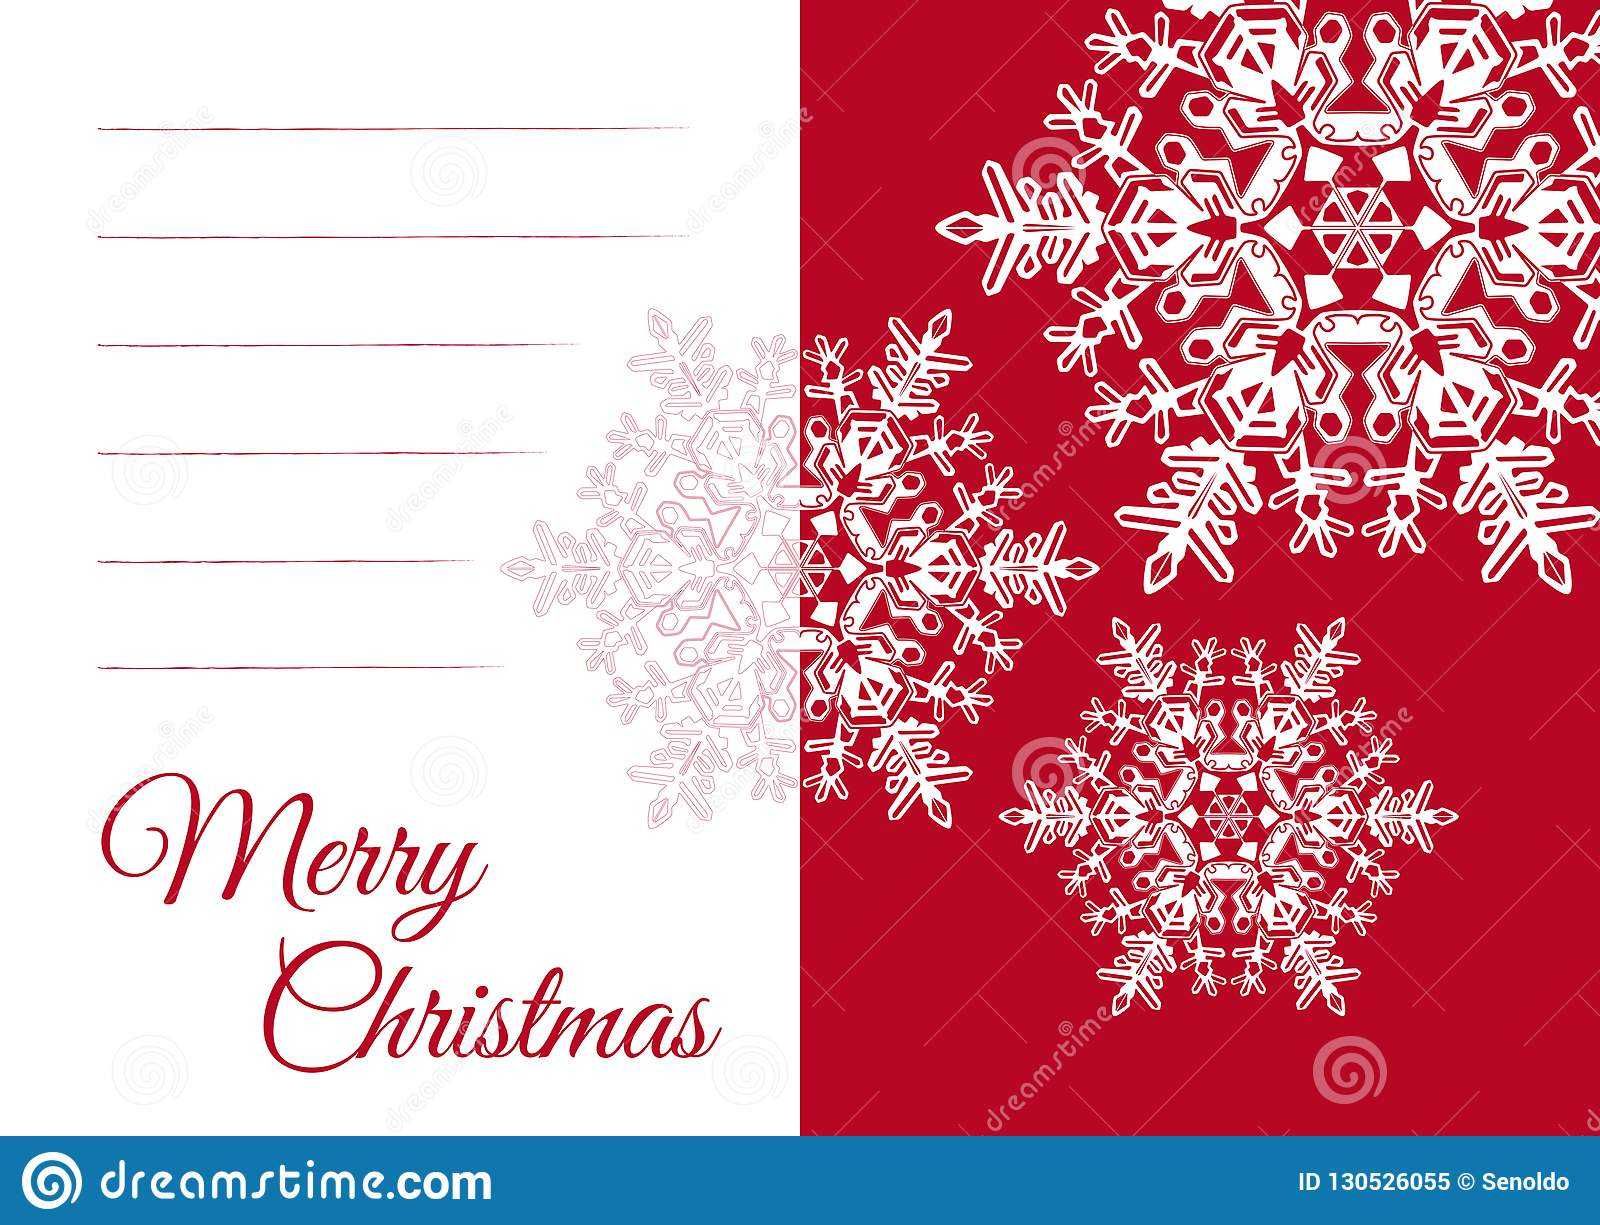 Christmas Greeting Card Template With Blank Text Field Stock In Free Printable Blank Greeting Card Templates